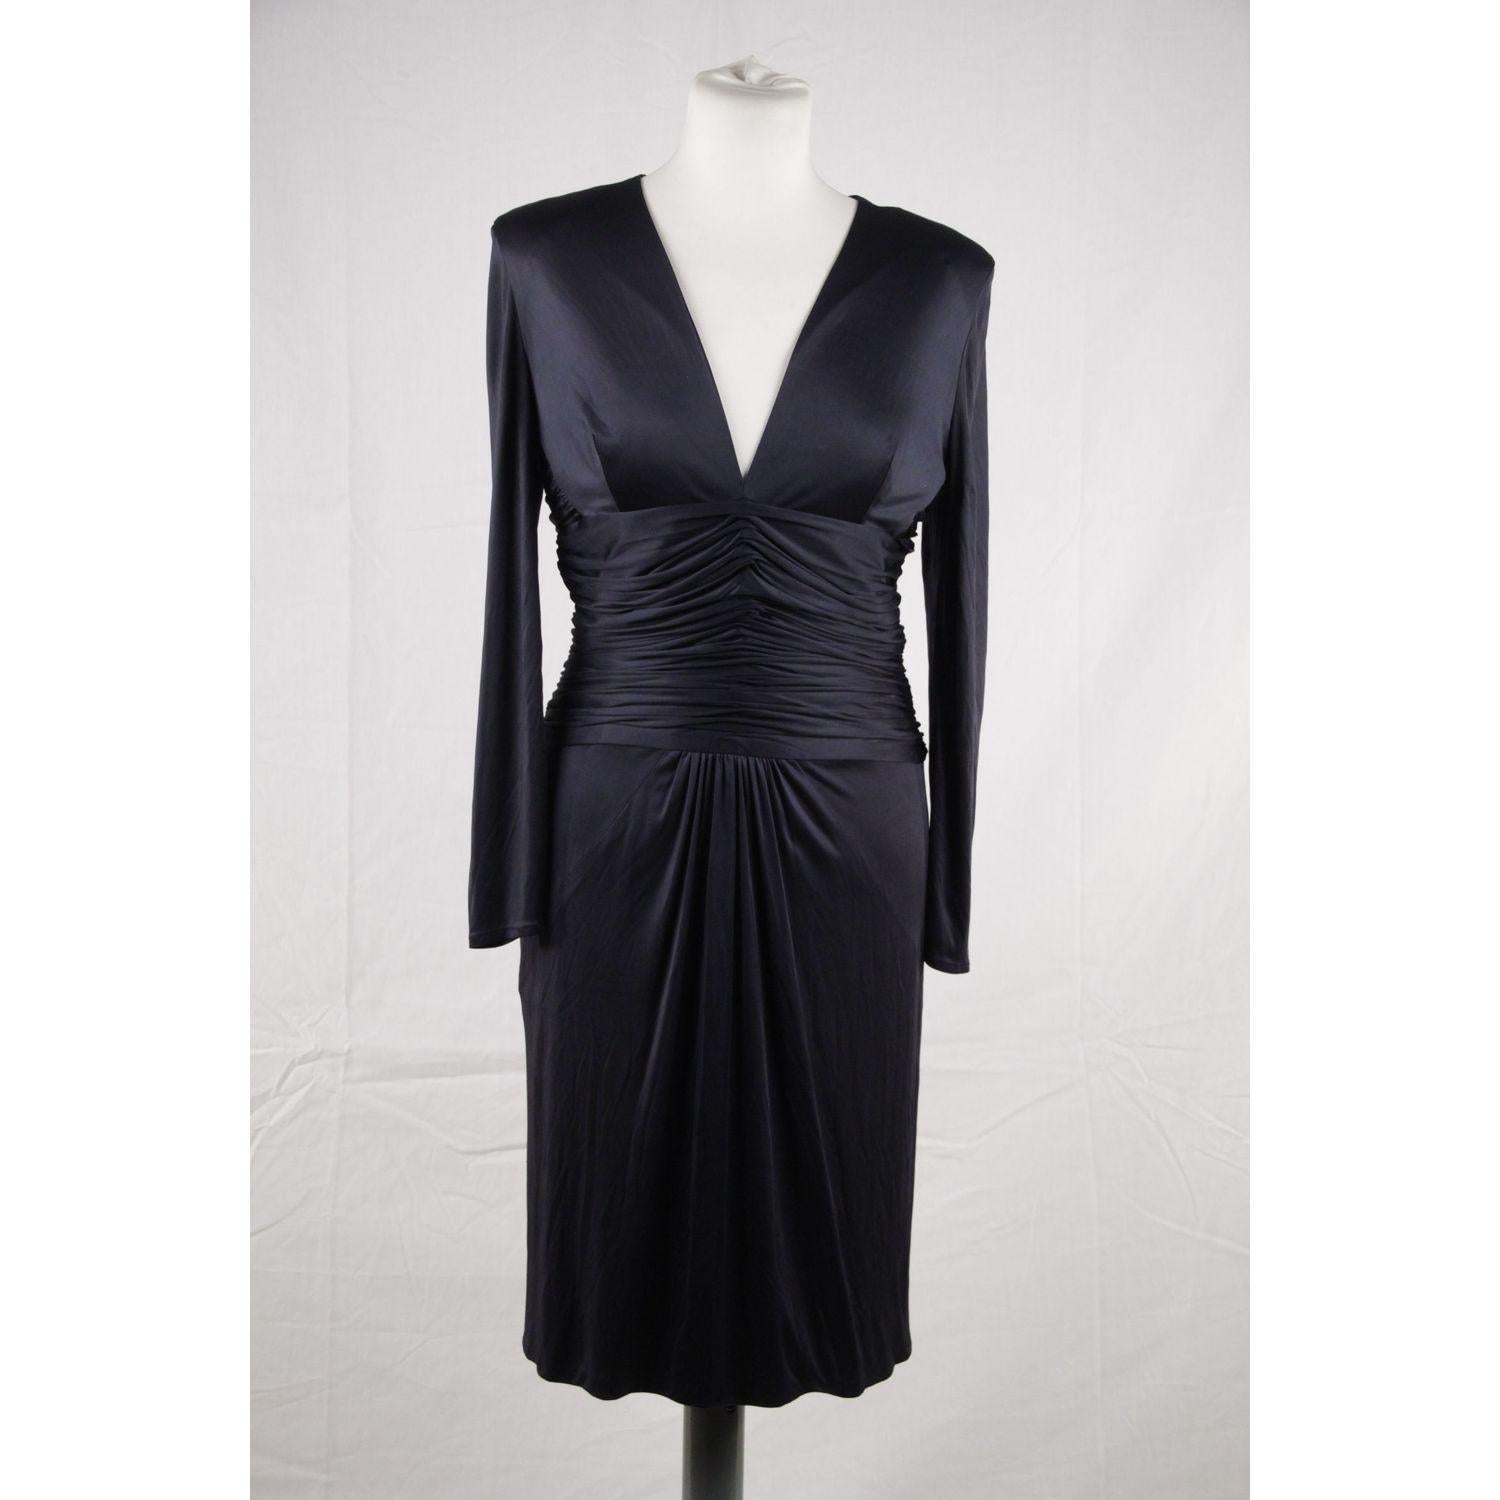 - VERSACE - Made in Italy 
- V-neckline design
- Long sleeve styling with light weight shoulder pads 
- Pleated and Draped detail to the front 
- Fabric / Material: 95% Viscose - 5% Silk 
- Color / Effect: Navy Blue 
- Main Closure: Rear zip closure